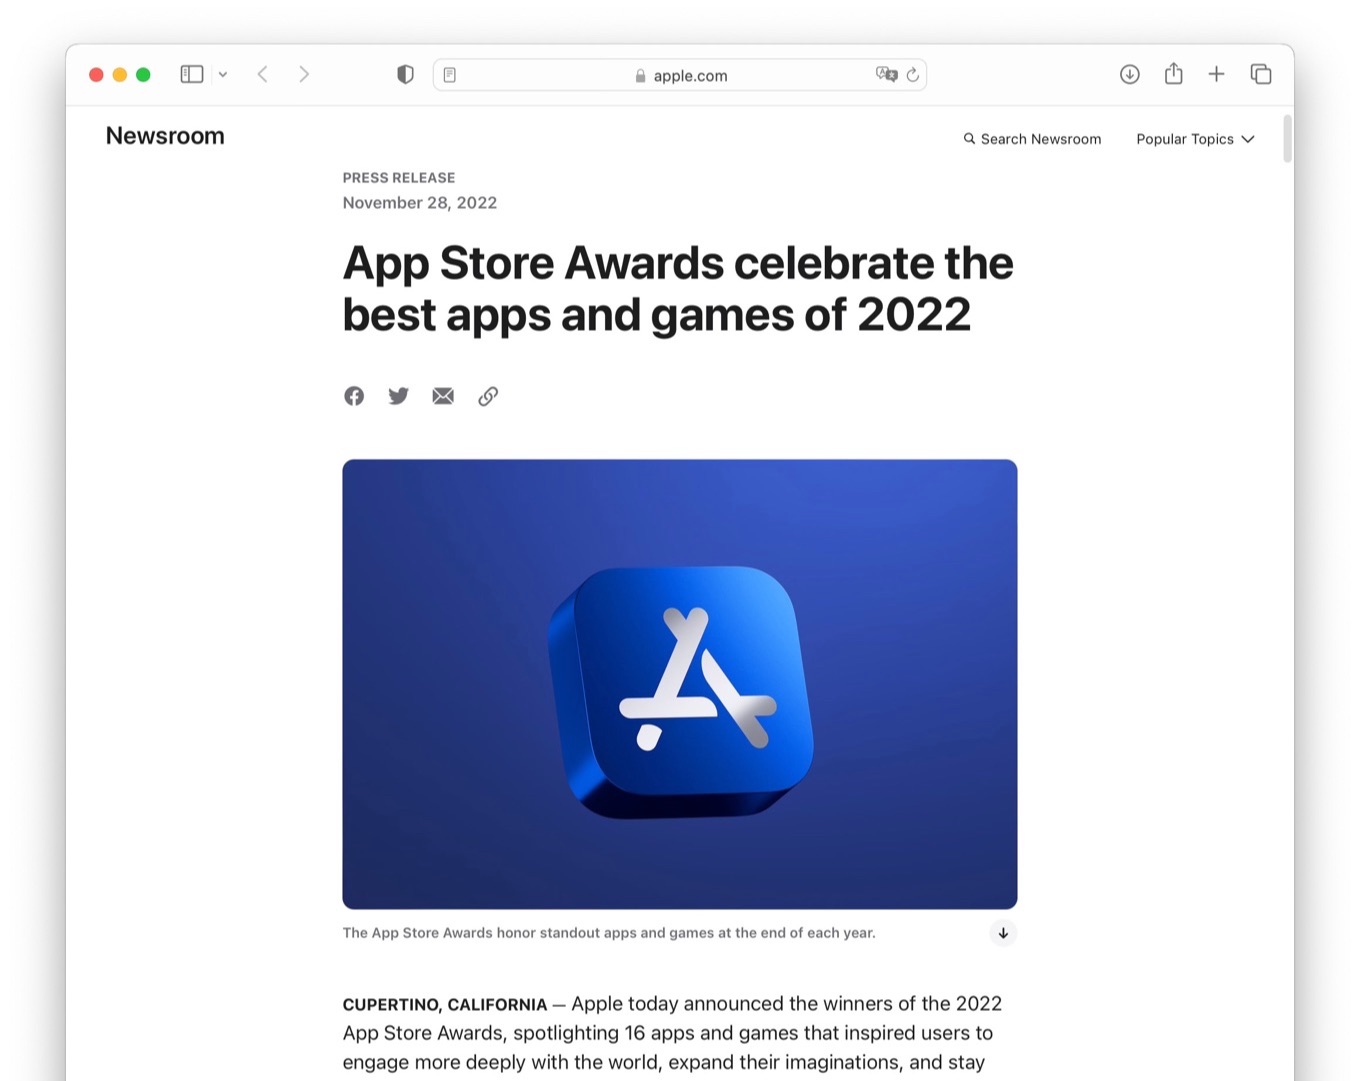 App Store Awards celebrate the best apps and games of 2022